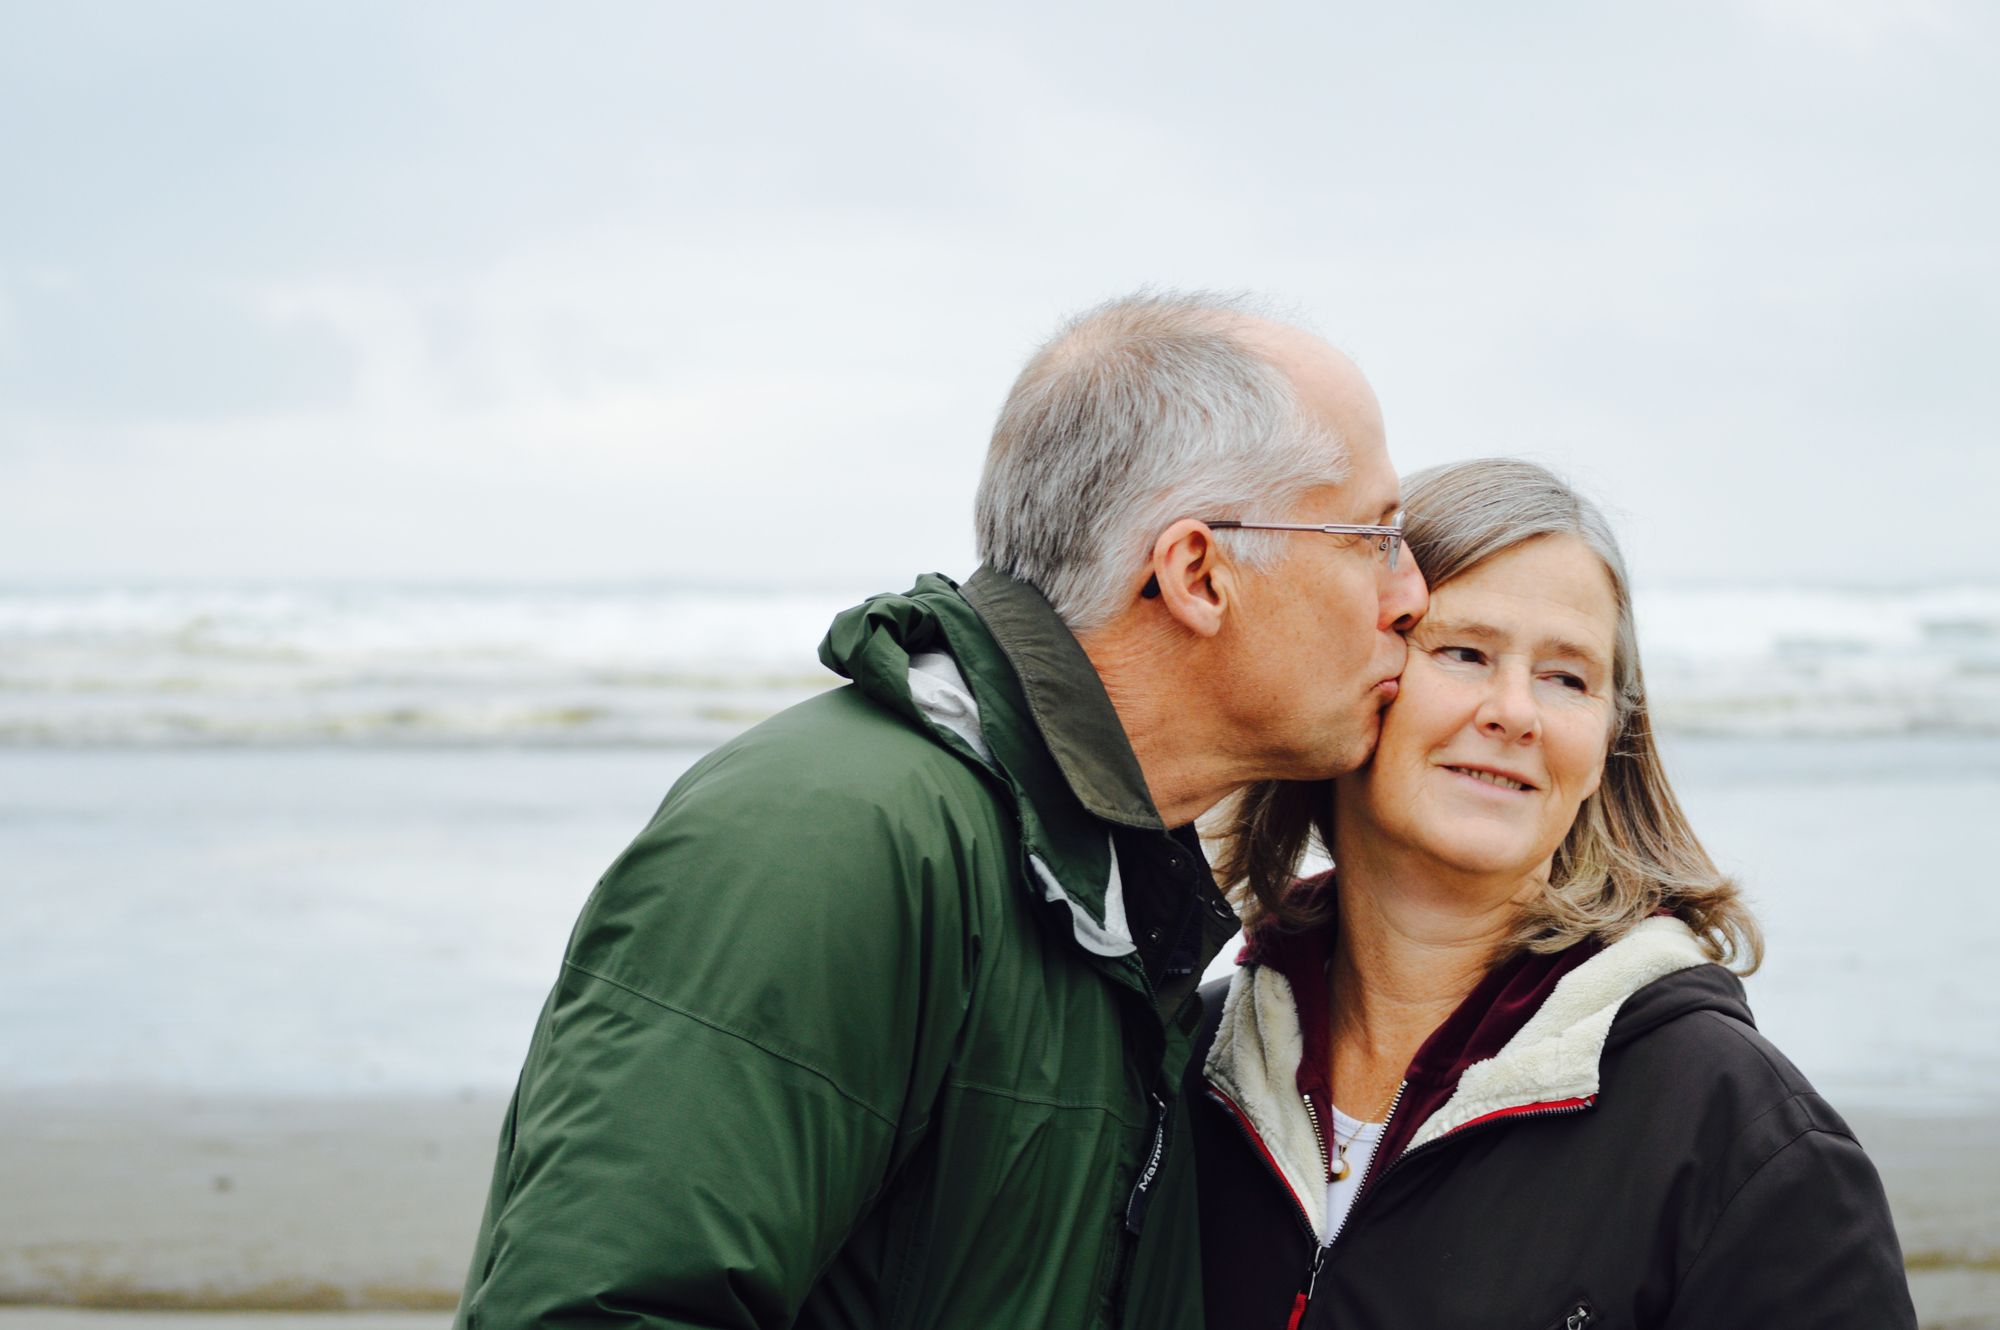 Man kissing his wife on the cheek at the beach, symbolizing the importance of maintaining prostate health for life's precious moments, as guided by Overflow Health.